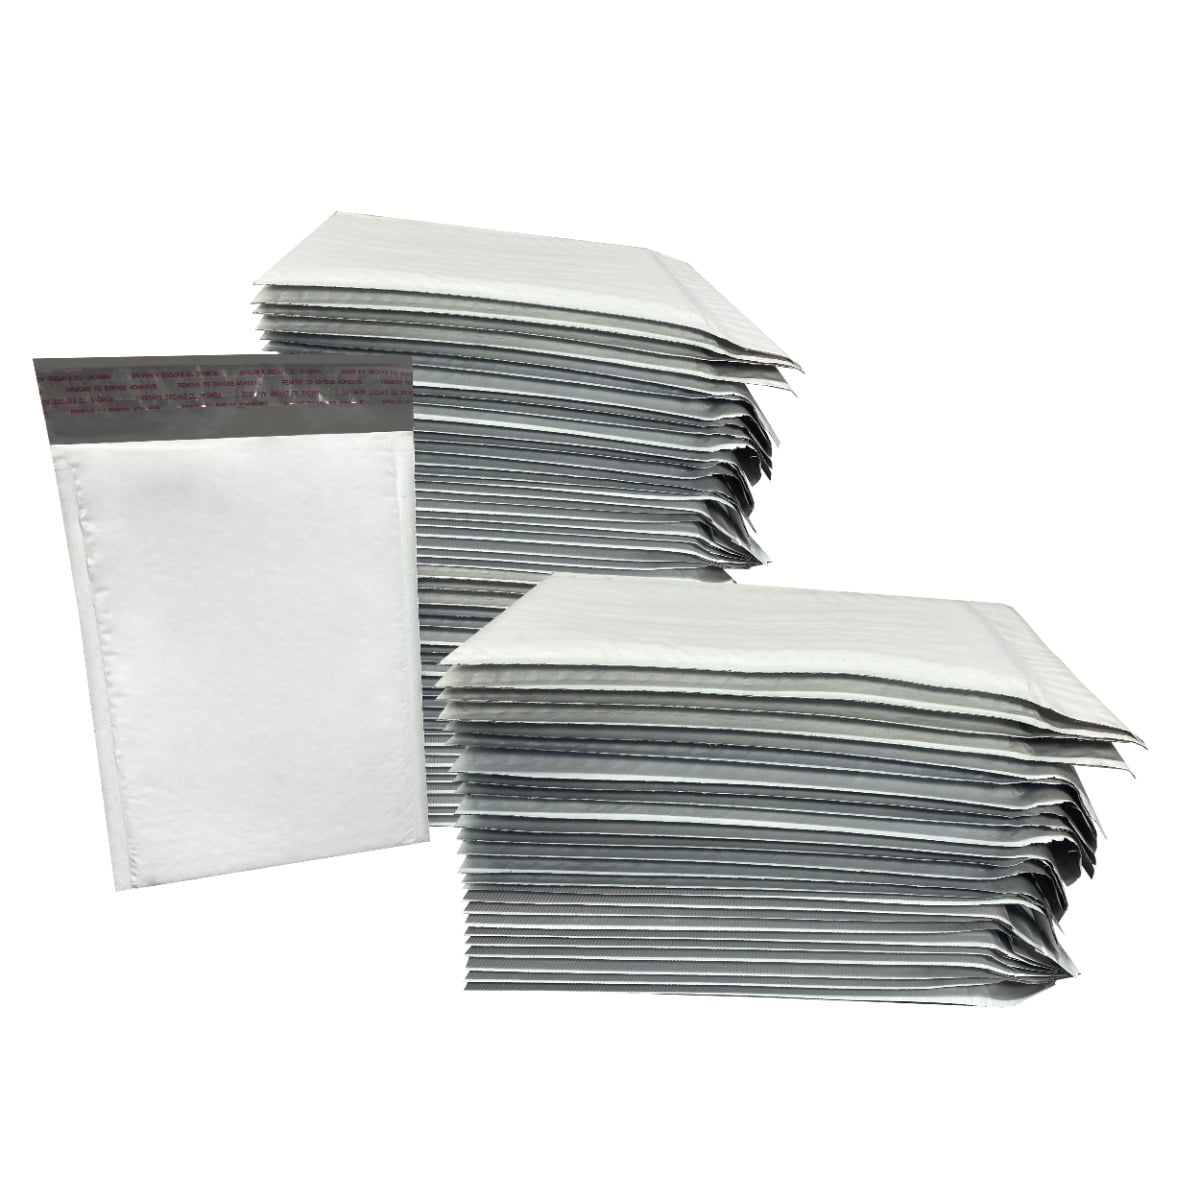 50 8x11.5 Clear Self-Sealing Bubble Out Bag Pouches from The Boxery 